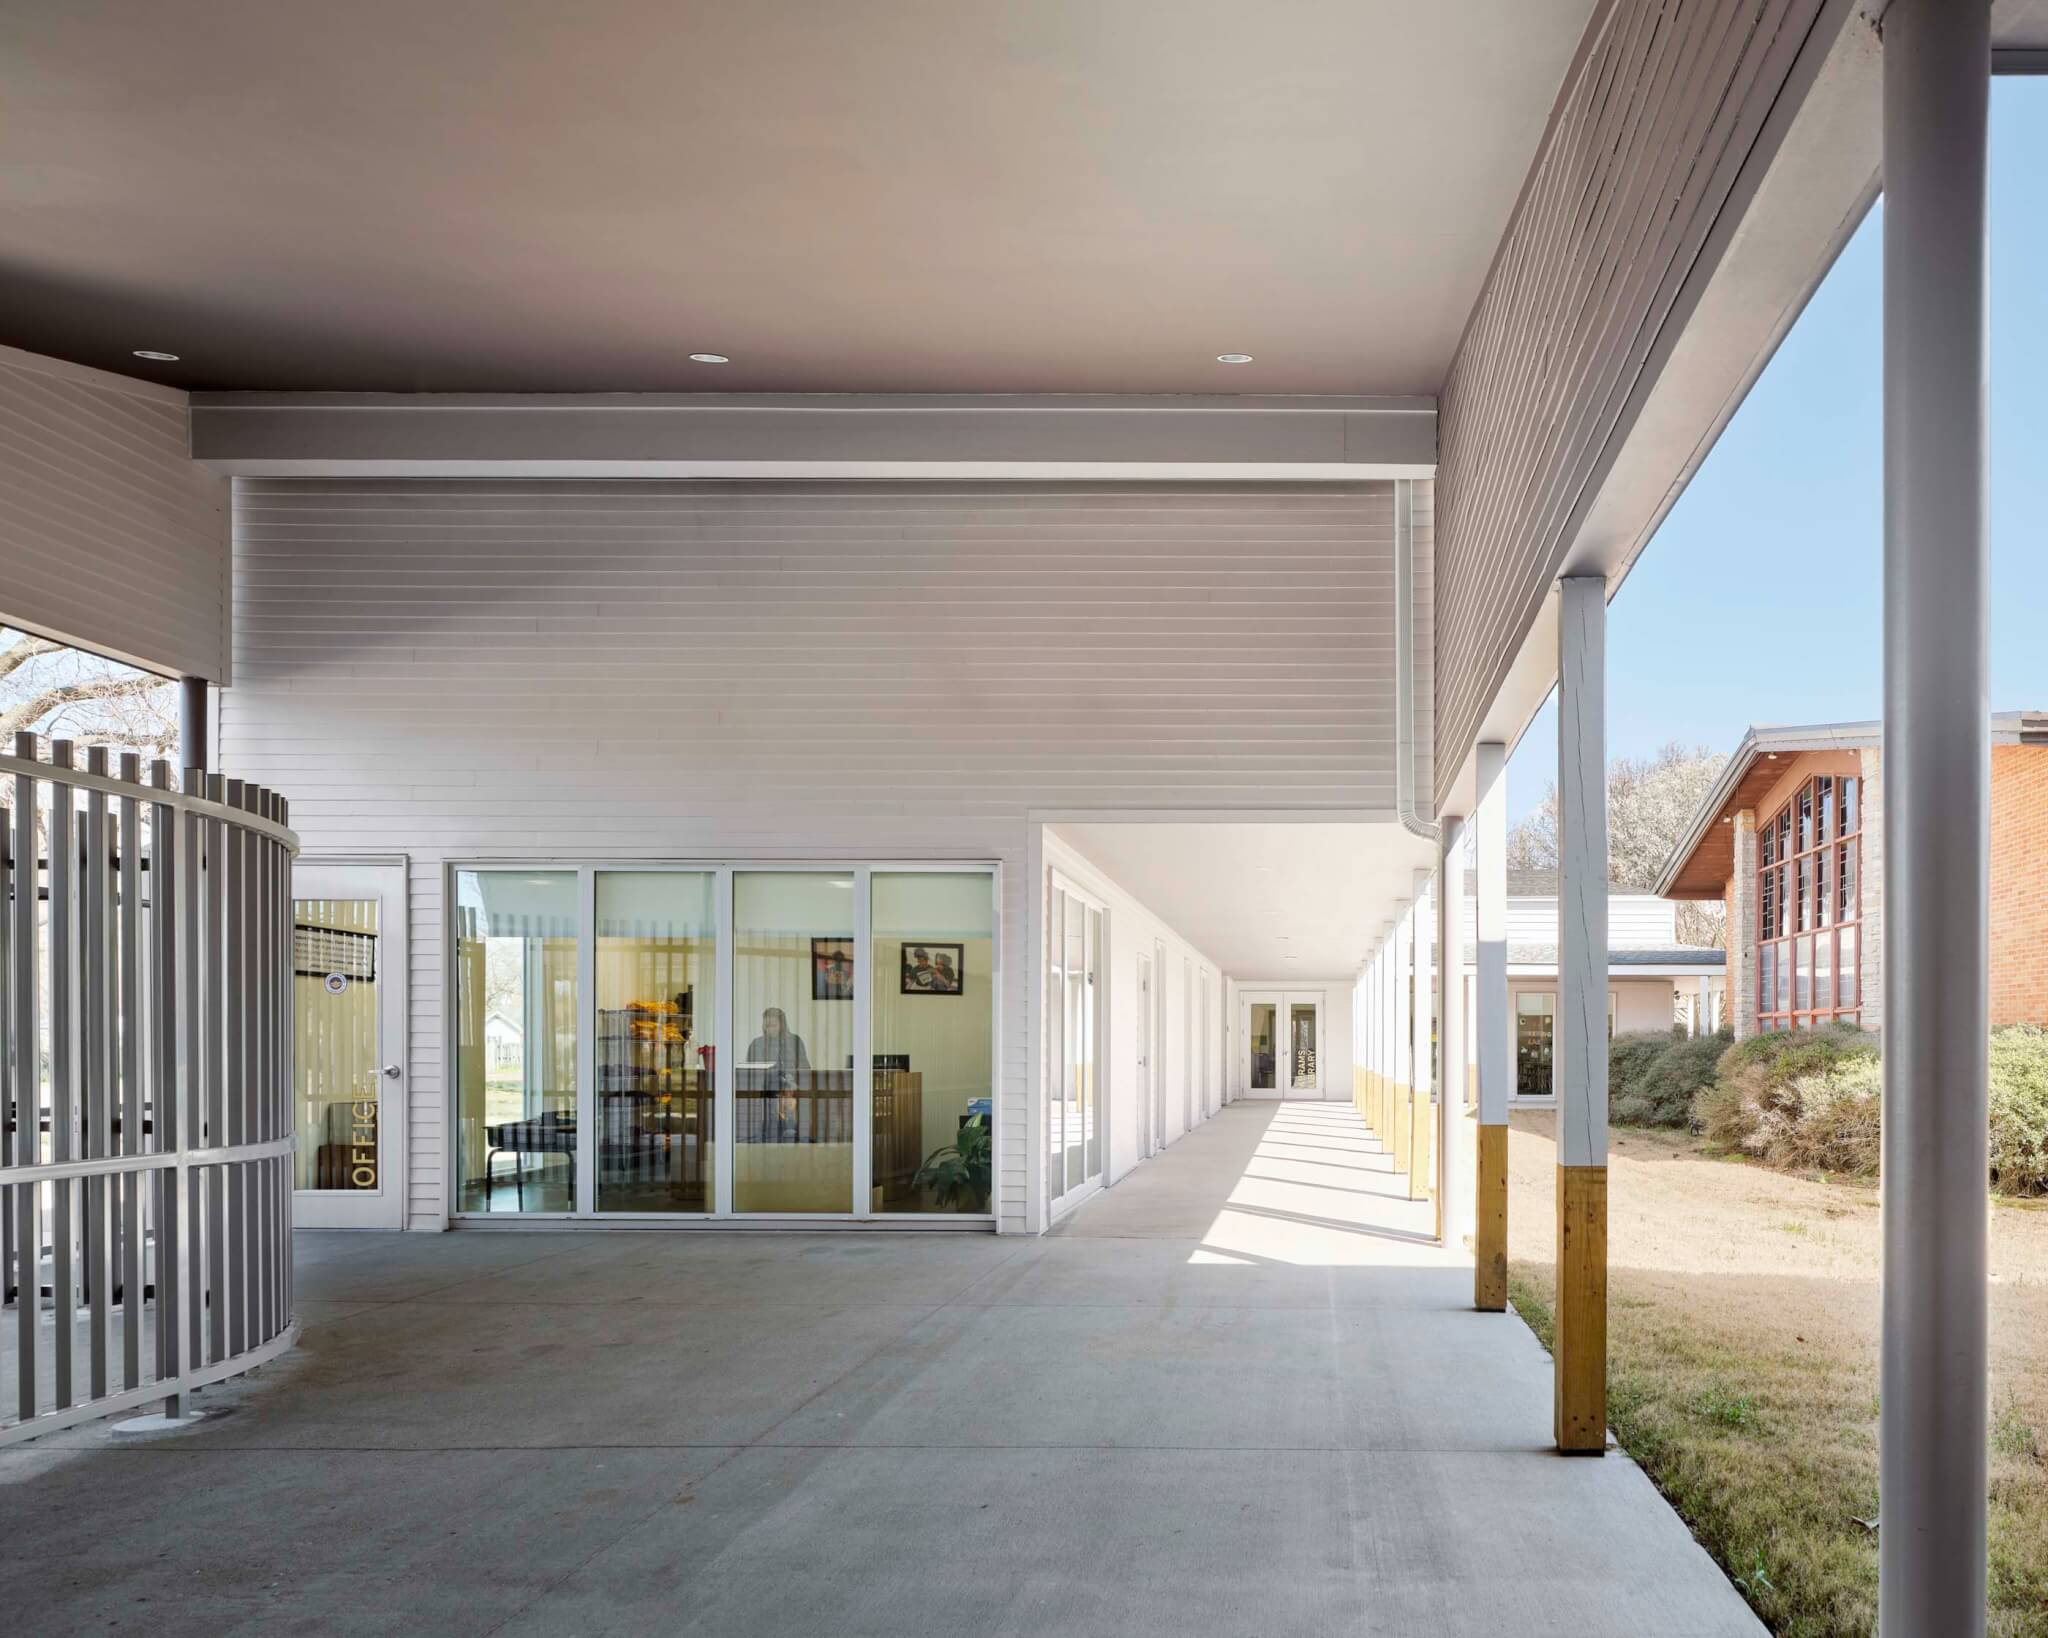 covered patio attached to school building